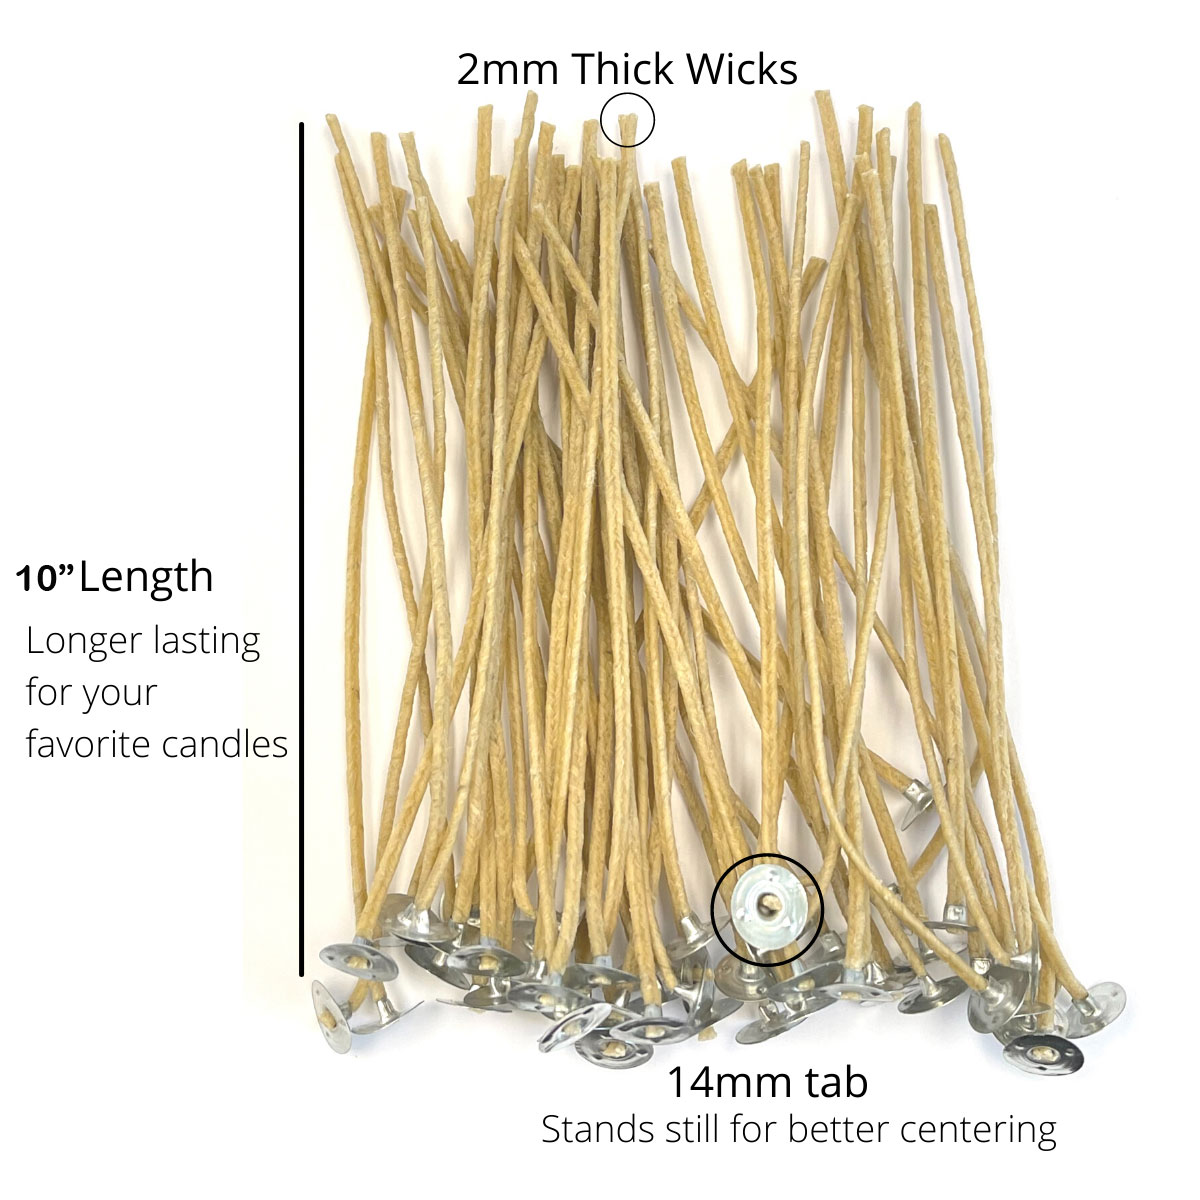 Hemp Wick And Tabs, Wicks Beeswax For Candle Making, 10 In, 50 pcs 